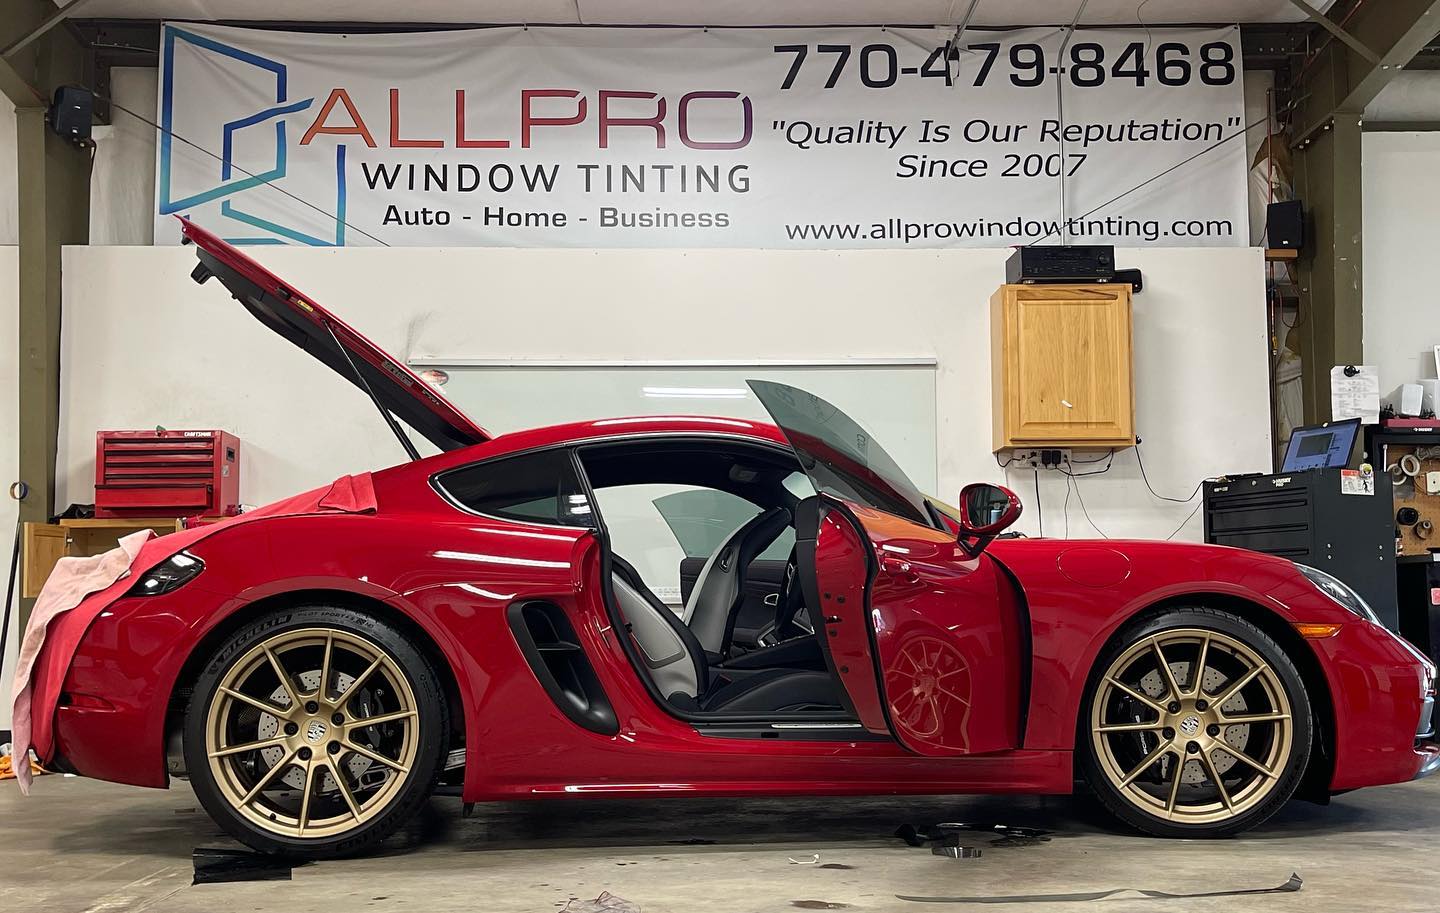 How Effective Is Auto Window Tinting for UV Protection?